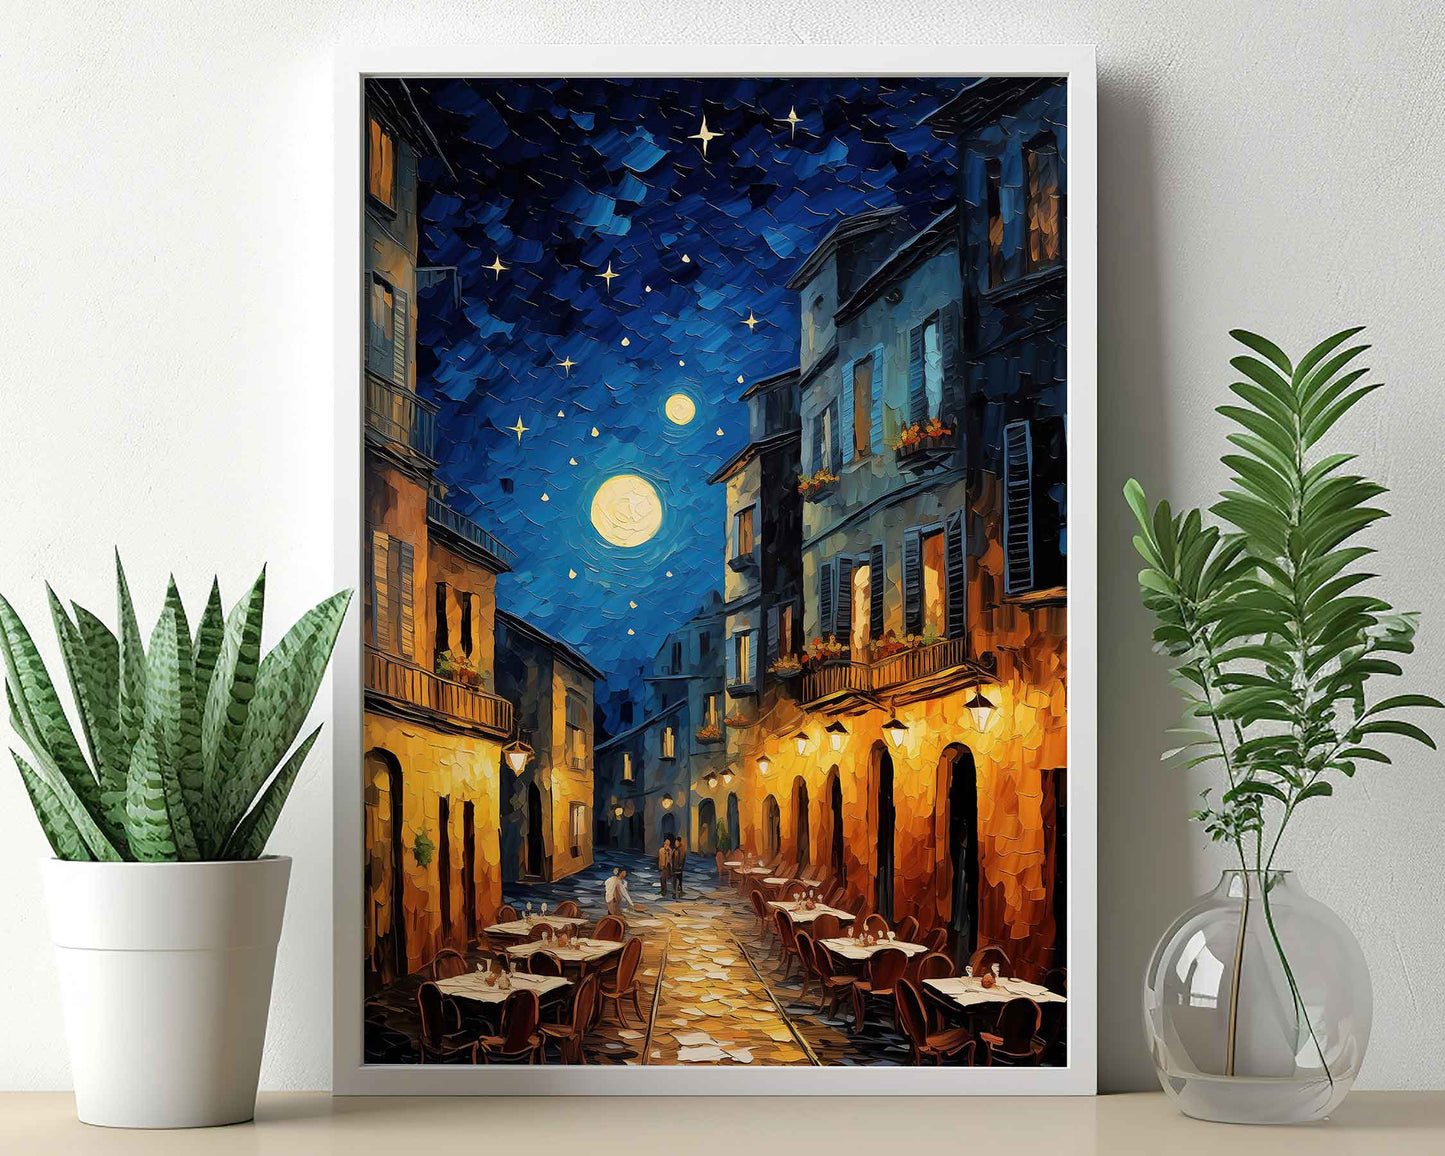 Framed Image of Van Gogh Style Starry Night in Rome Wall Art Print Poster